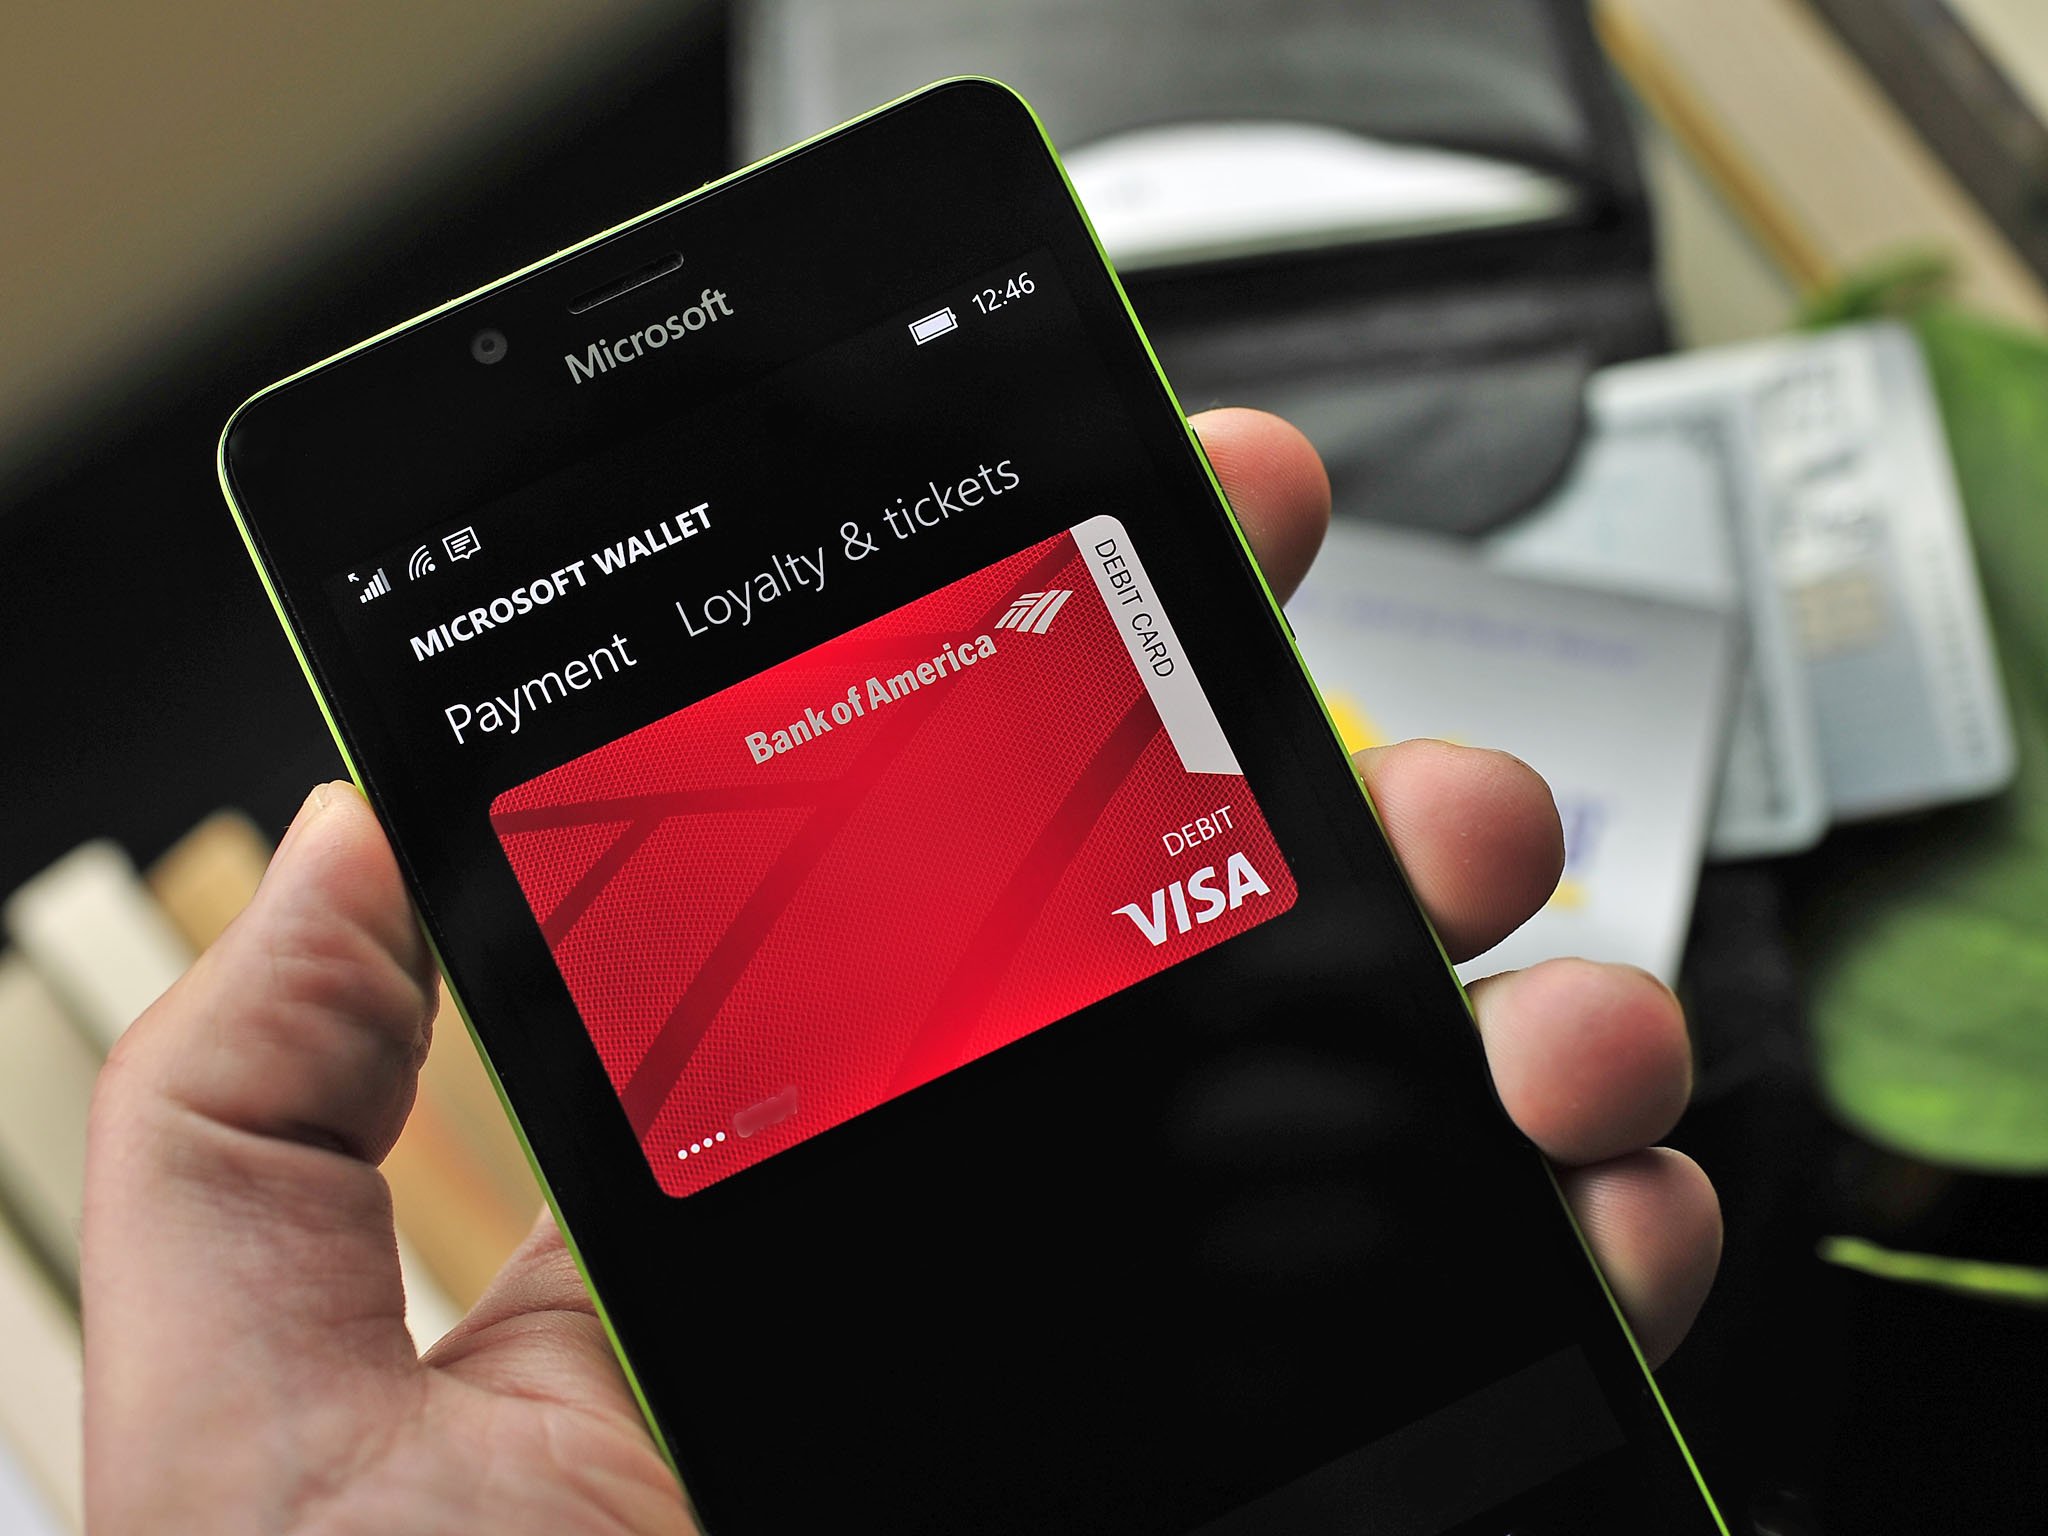 Windows 10 Mobile Tap to Pay